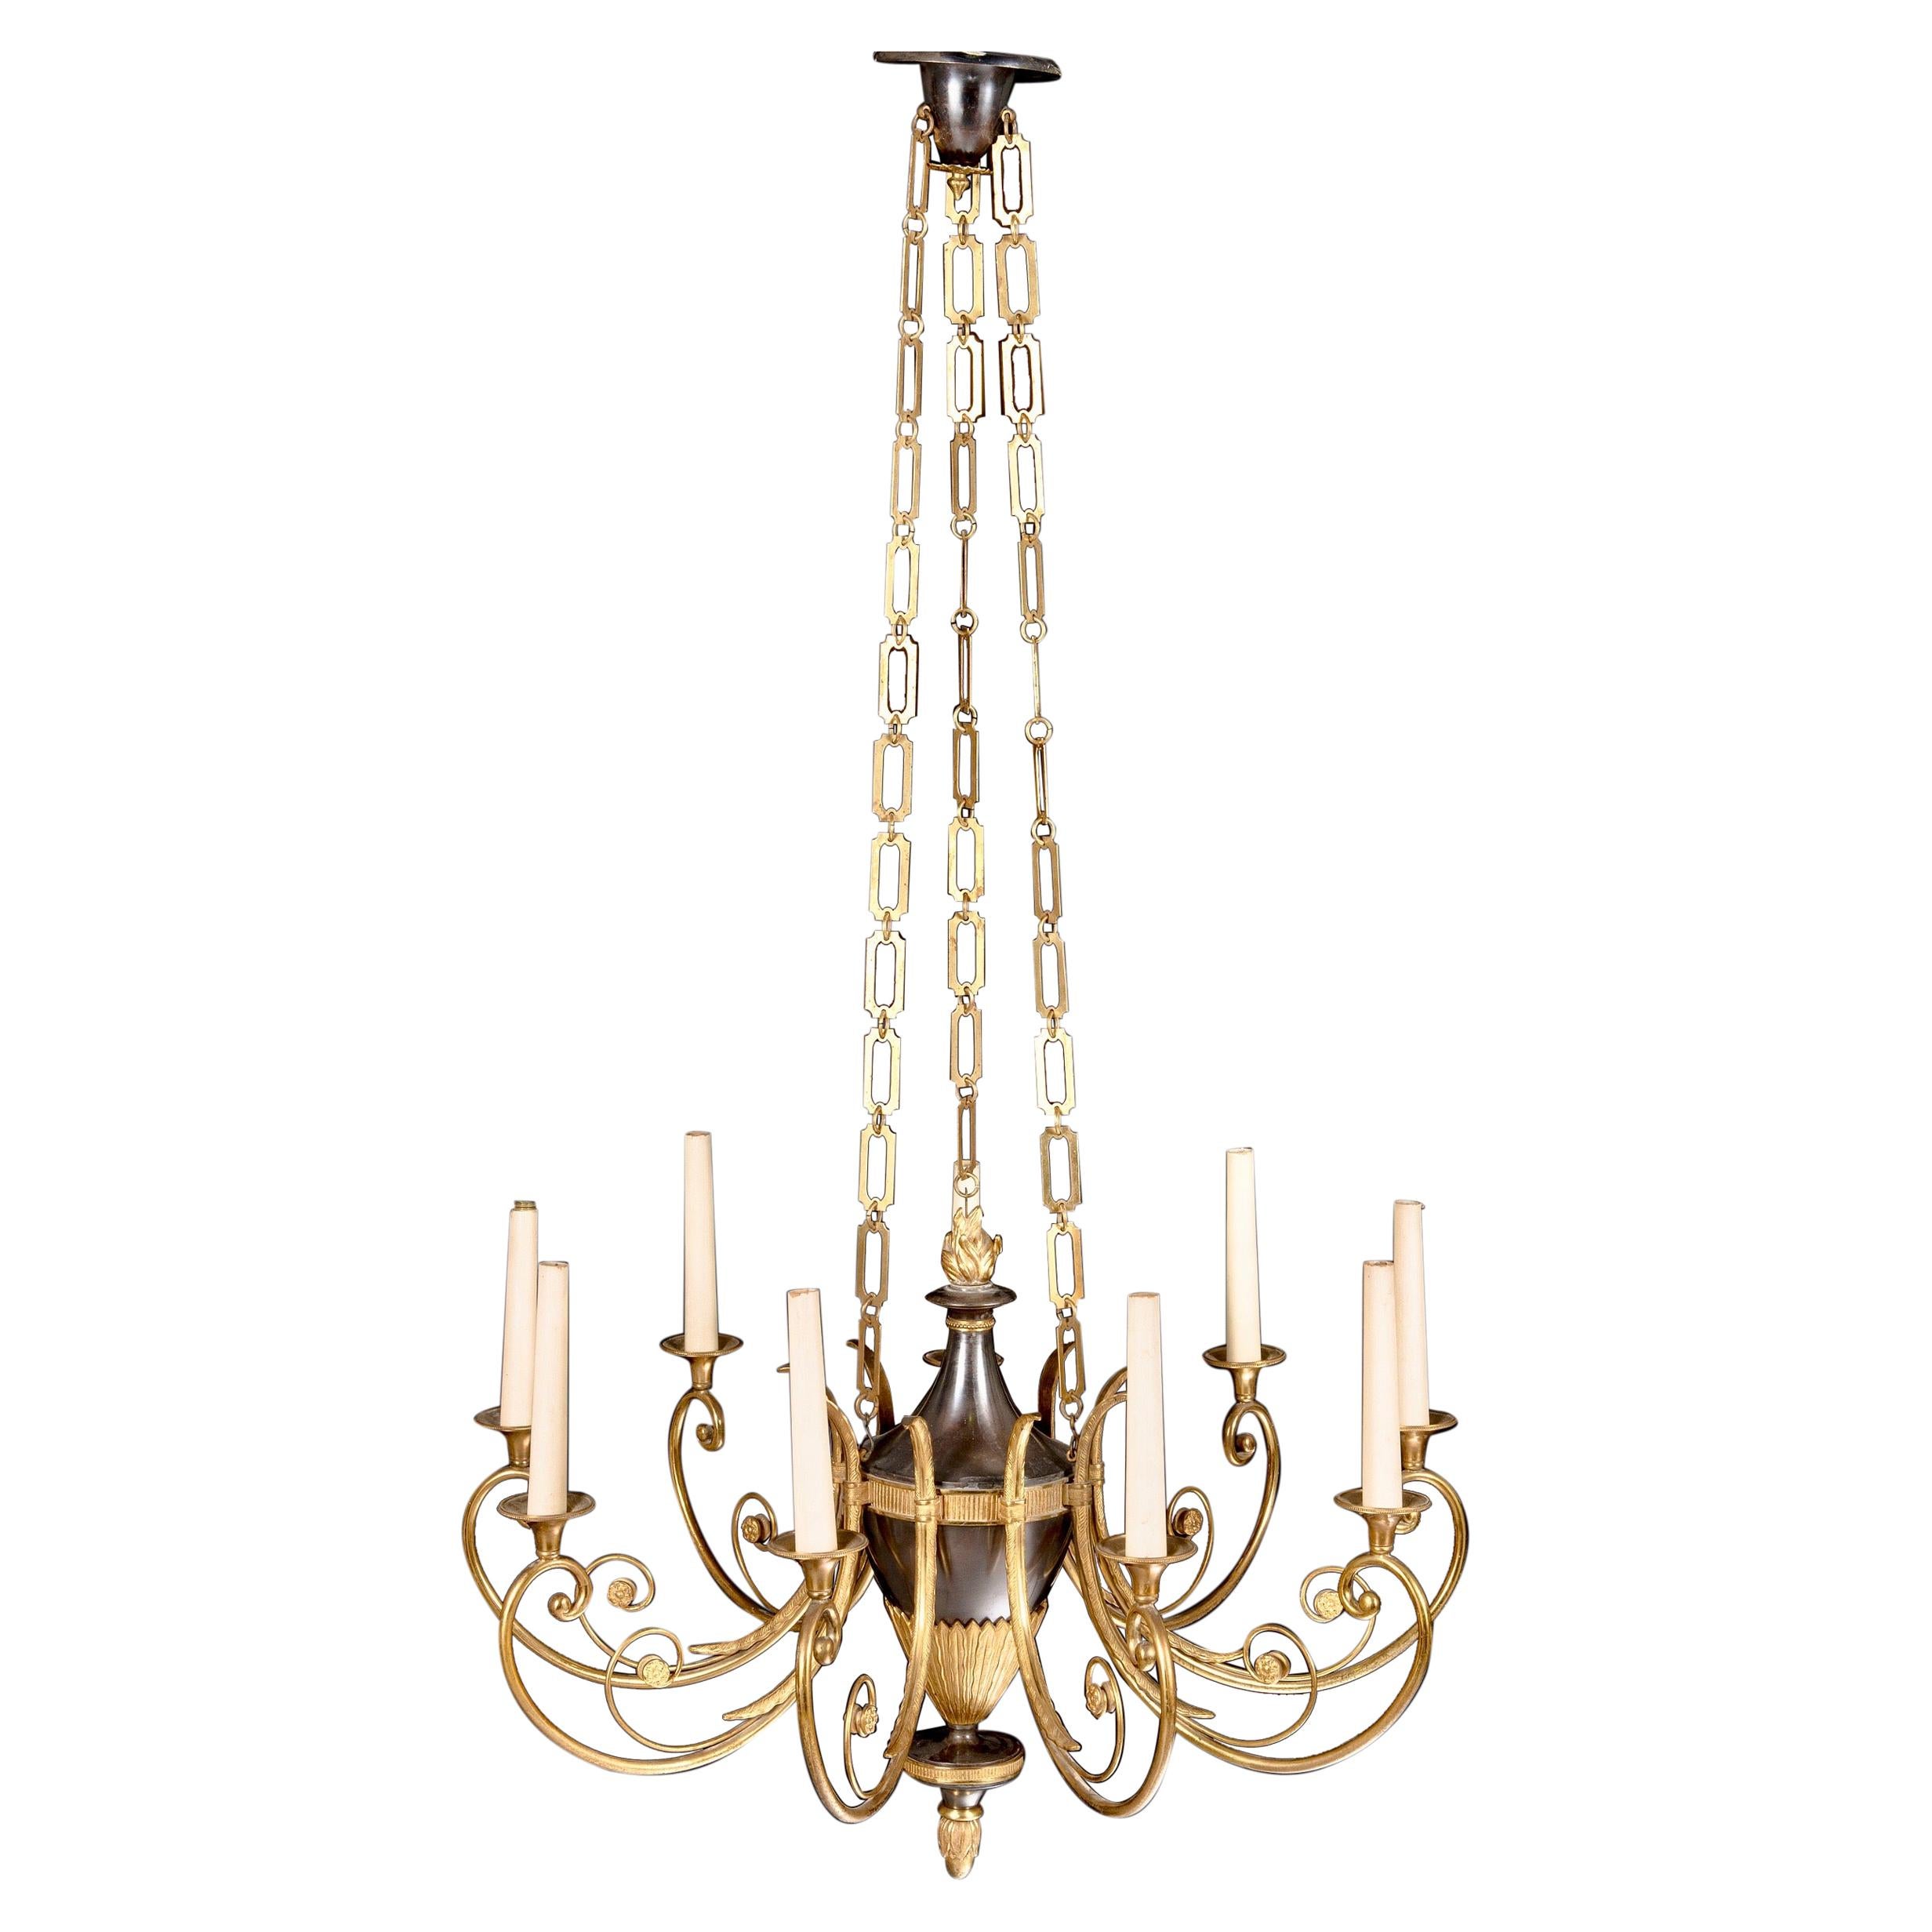 Nine-Light Chandelier in the Neoclassical Style